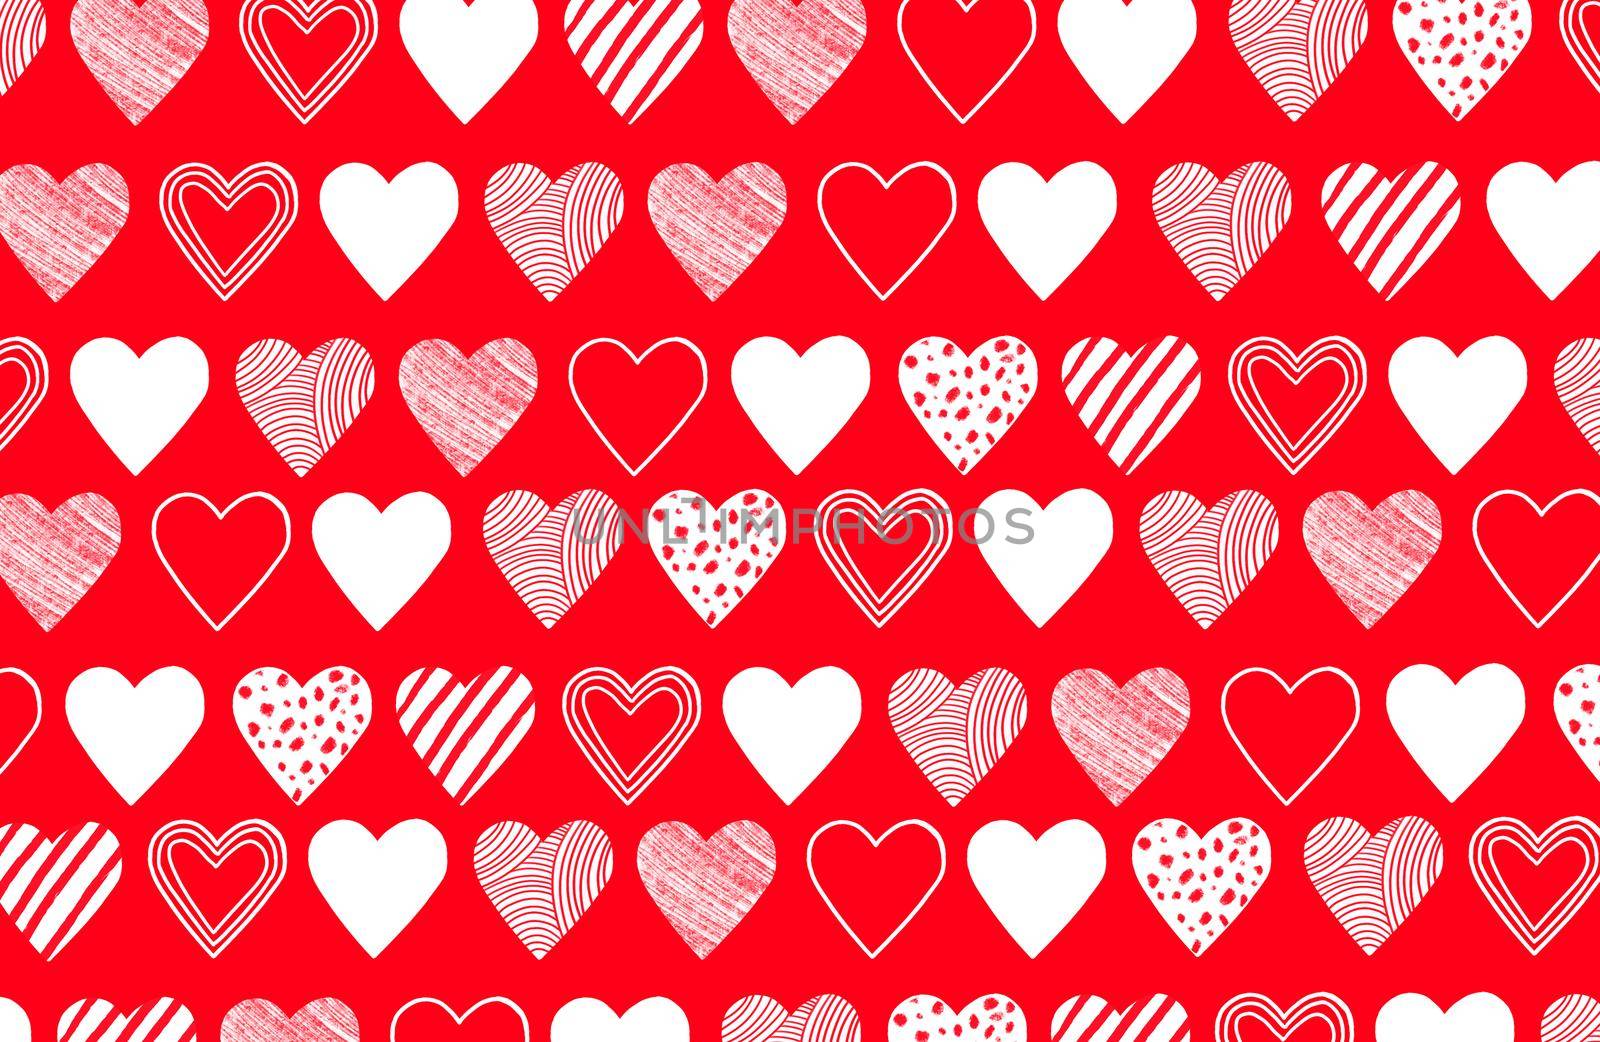 Hand drawn hearts illustration. Bright pattern for Saint Valentine's day by lavsketch